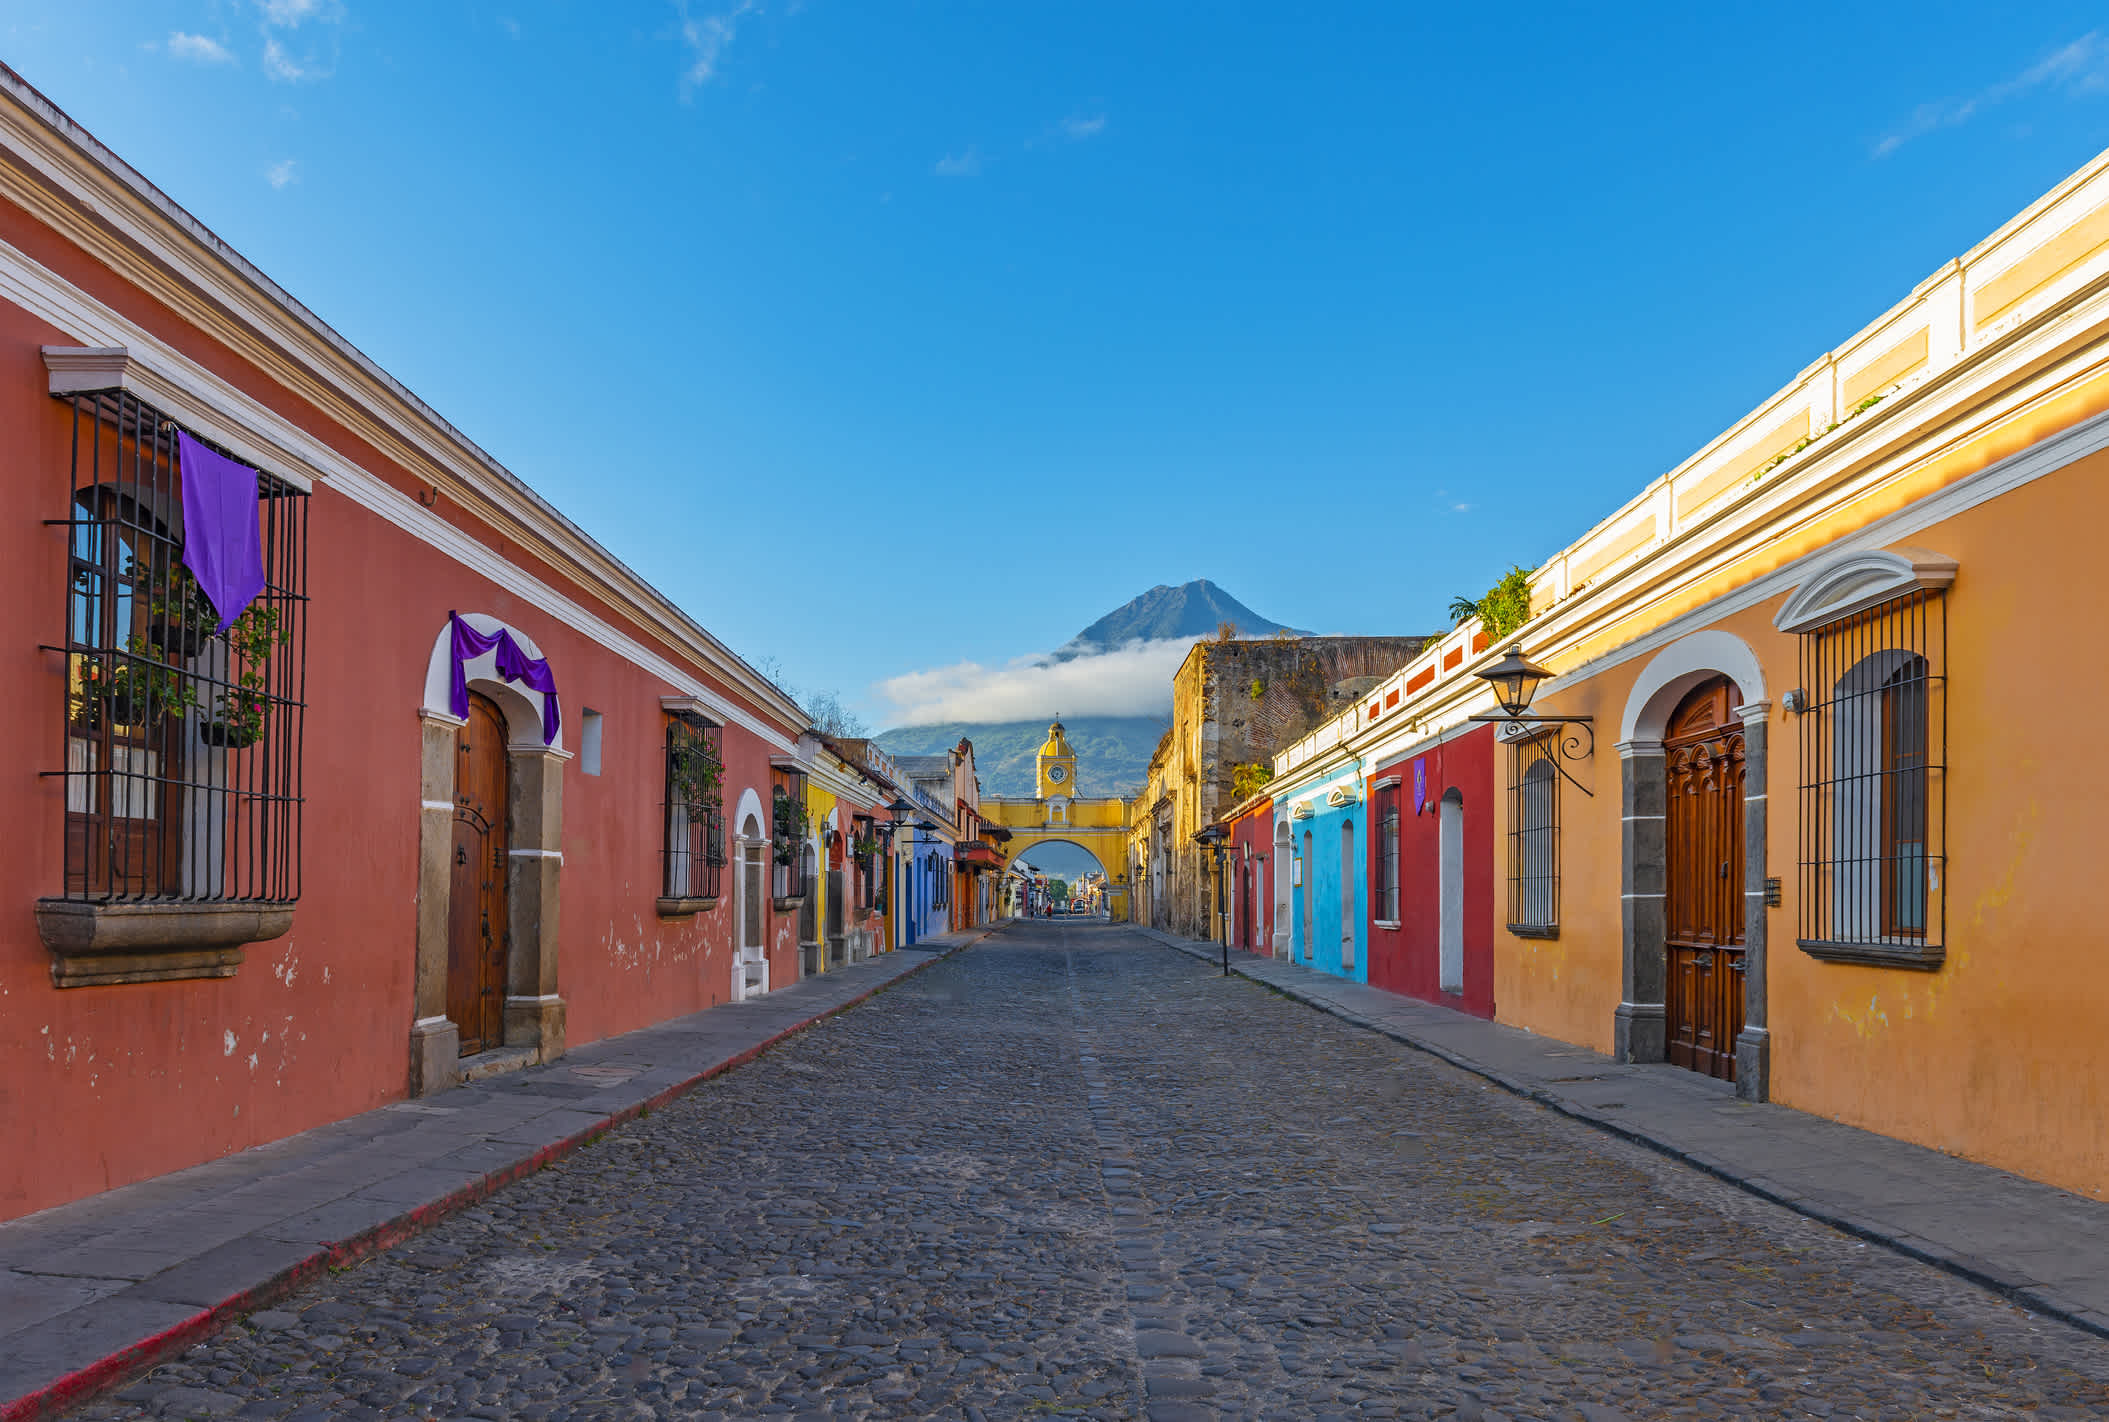 Discover colorful colonial towns and volcanos on a tour of Central America